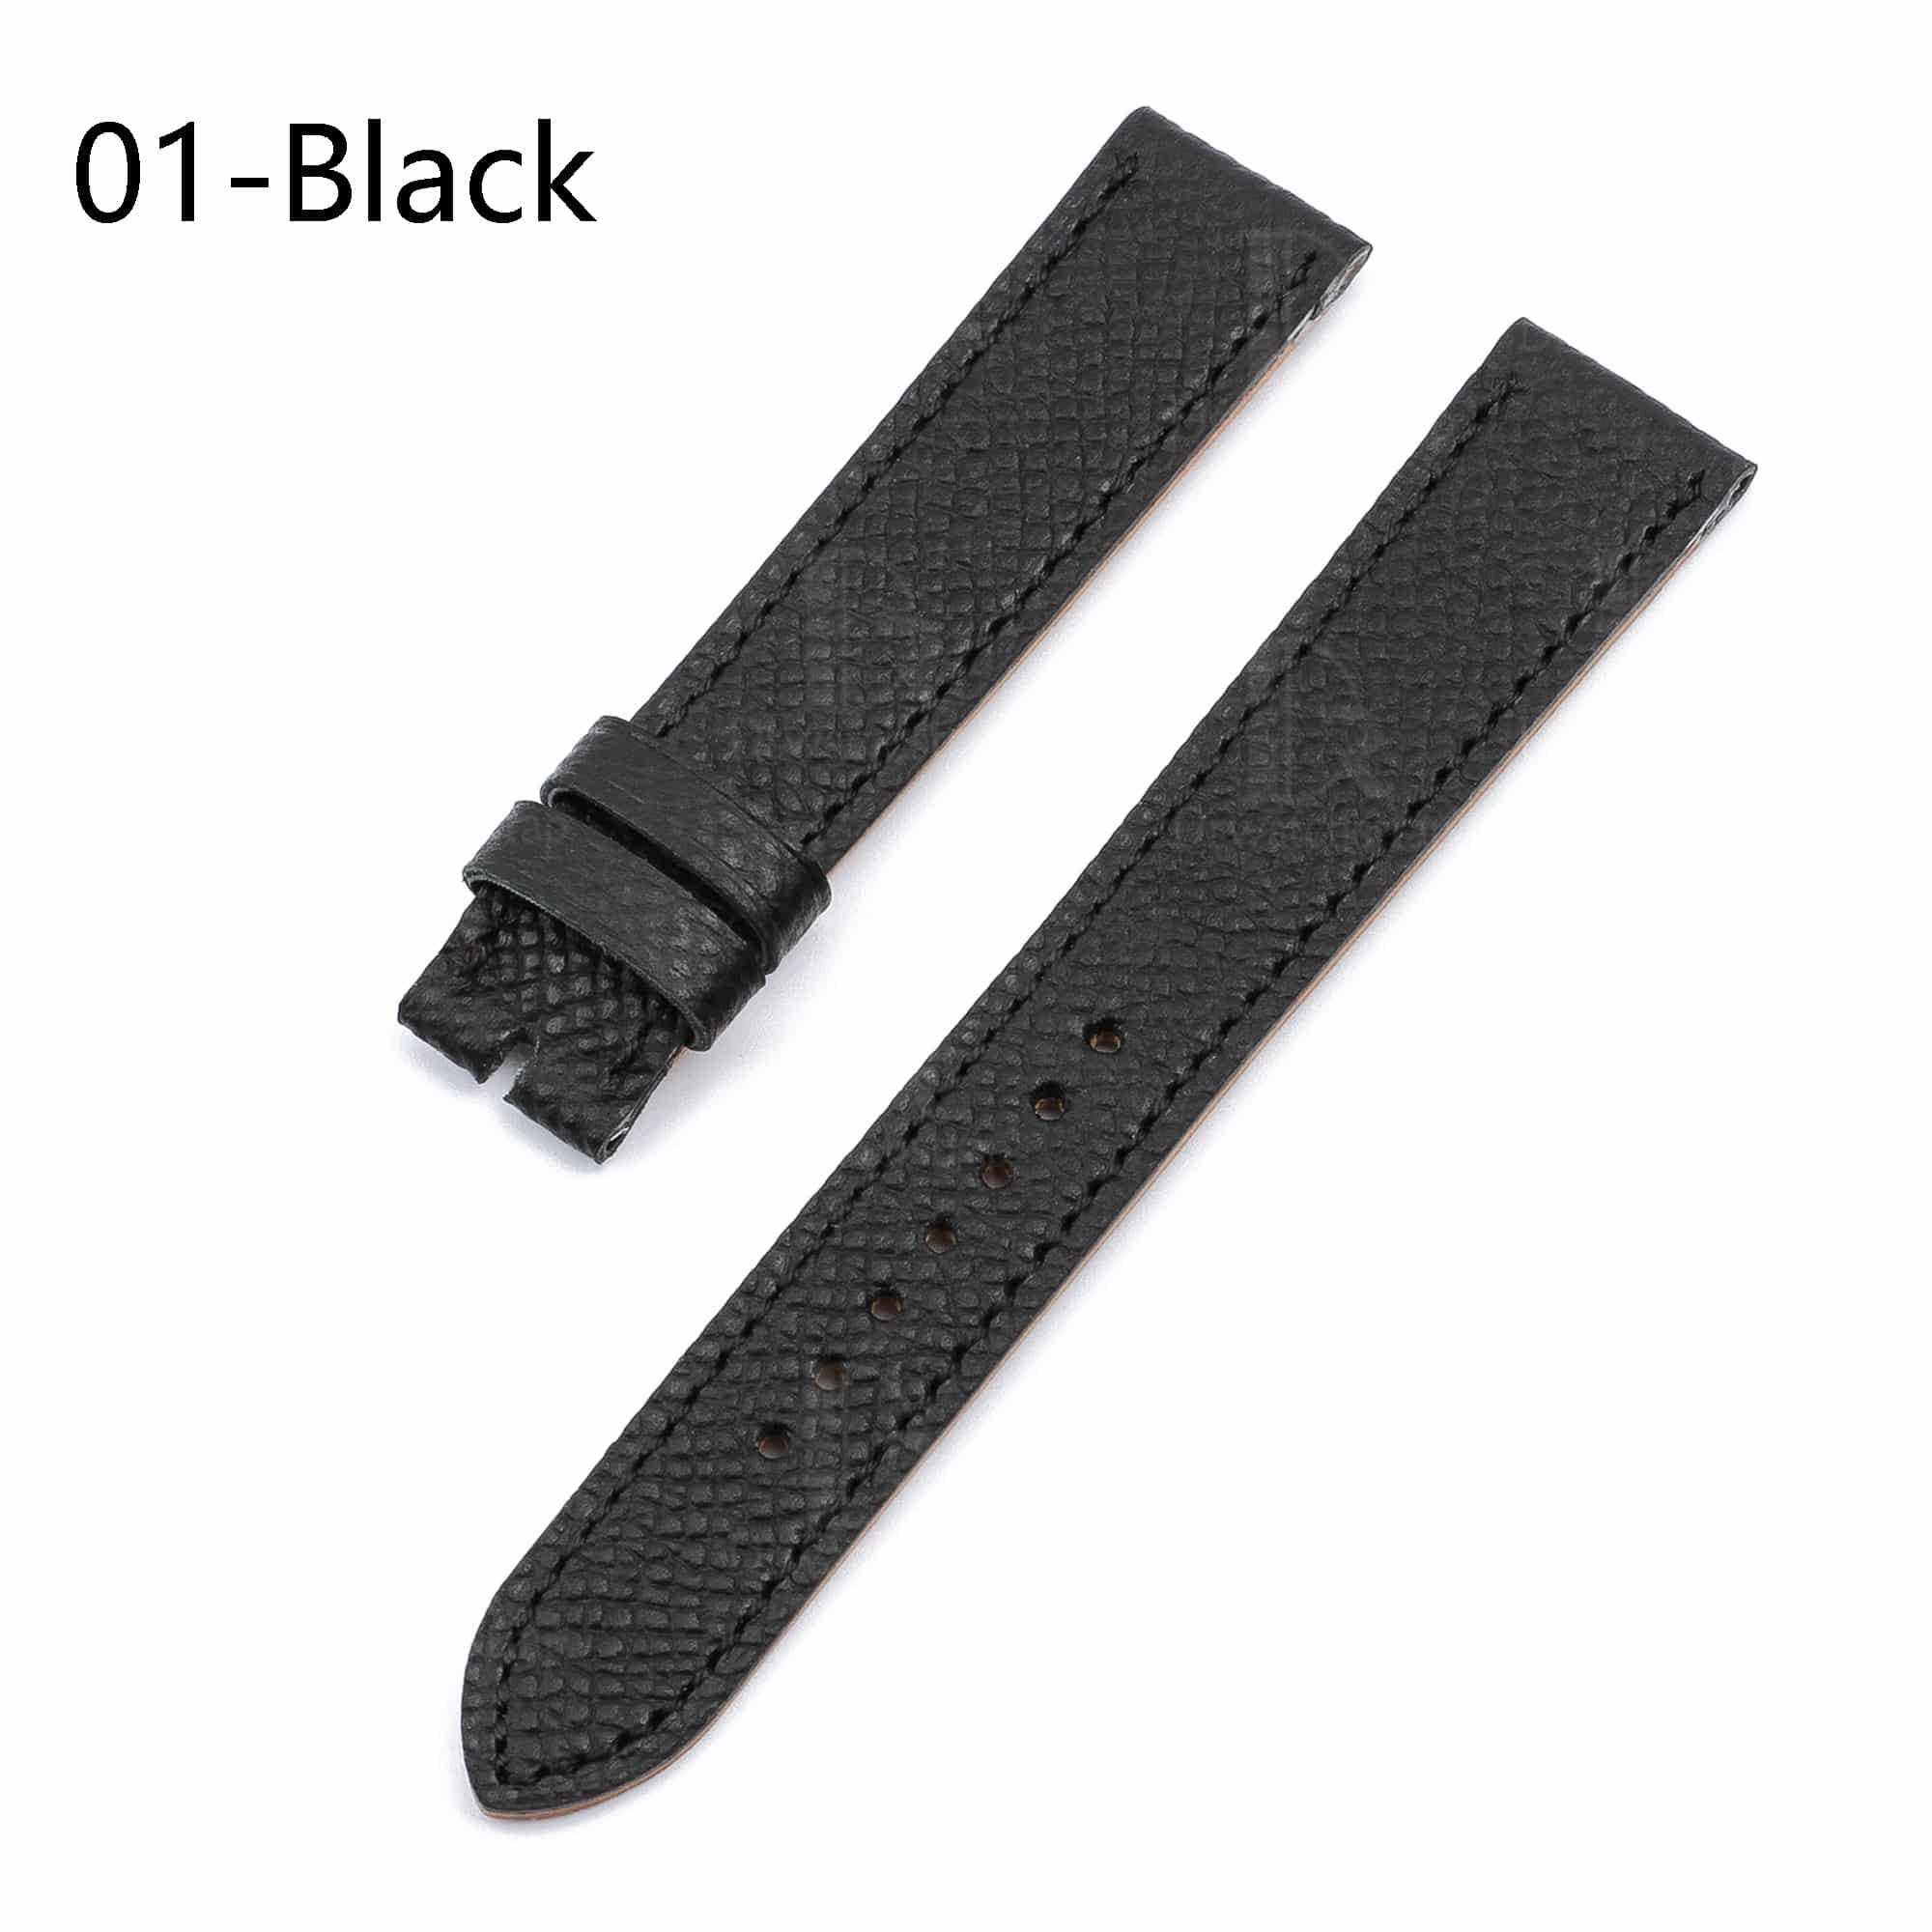 Buy Hermes watch band black leather strap replacement Epson